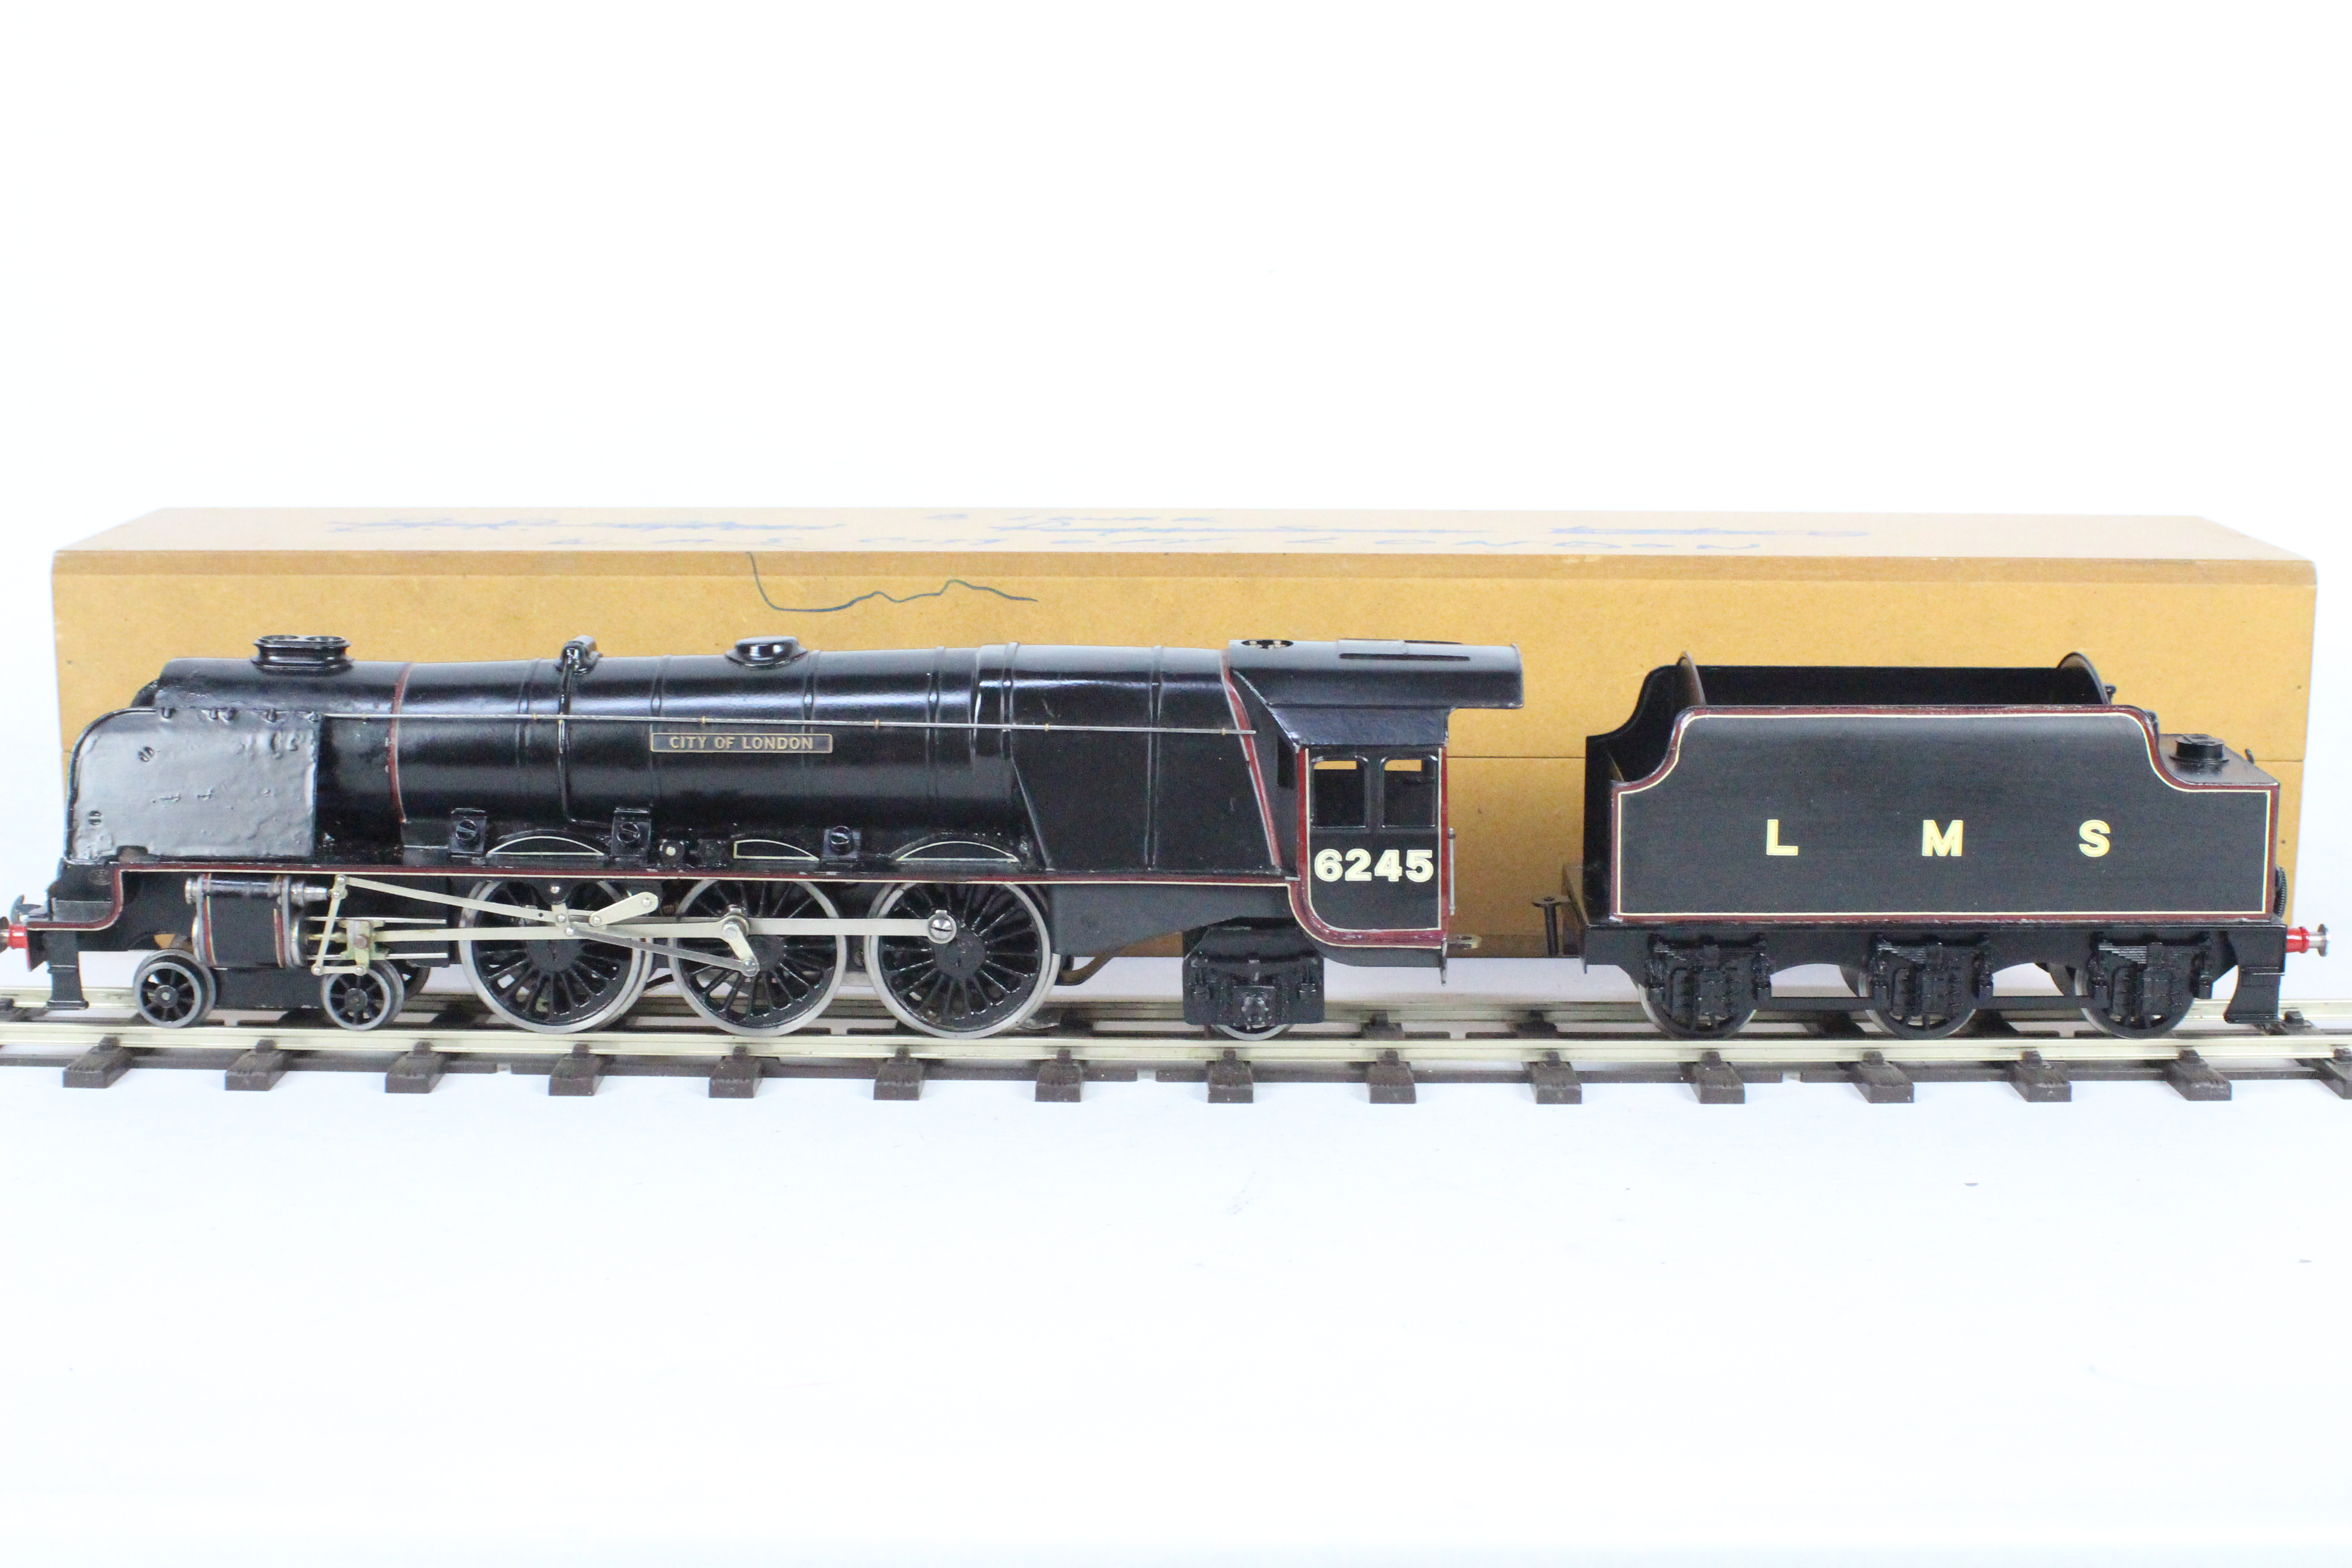 Bassett Lowke - An O gauge electric 3 rail Class 7P 4-6-2 steam loco which has been restored and is